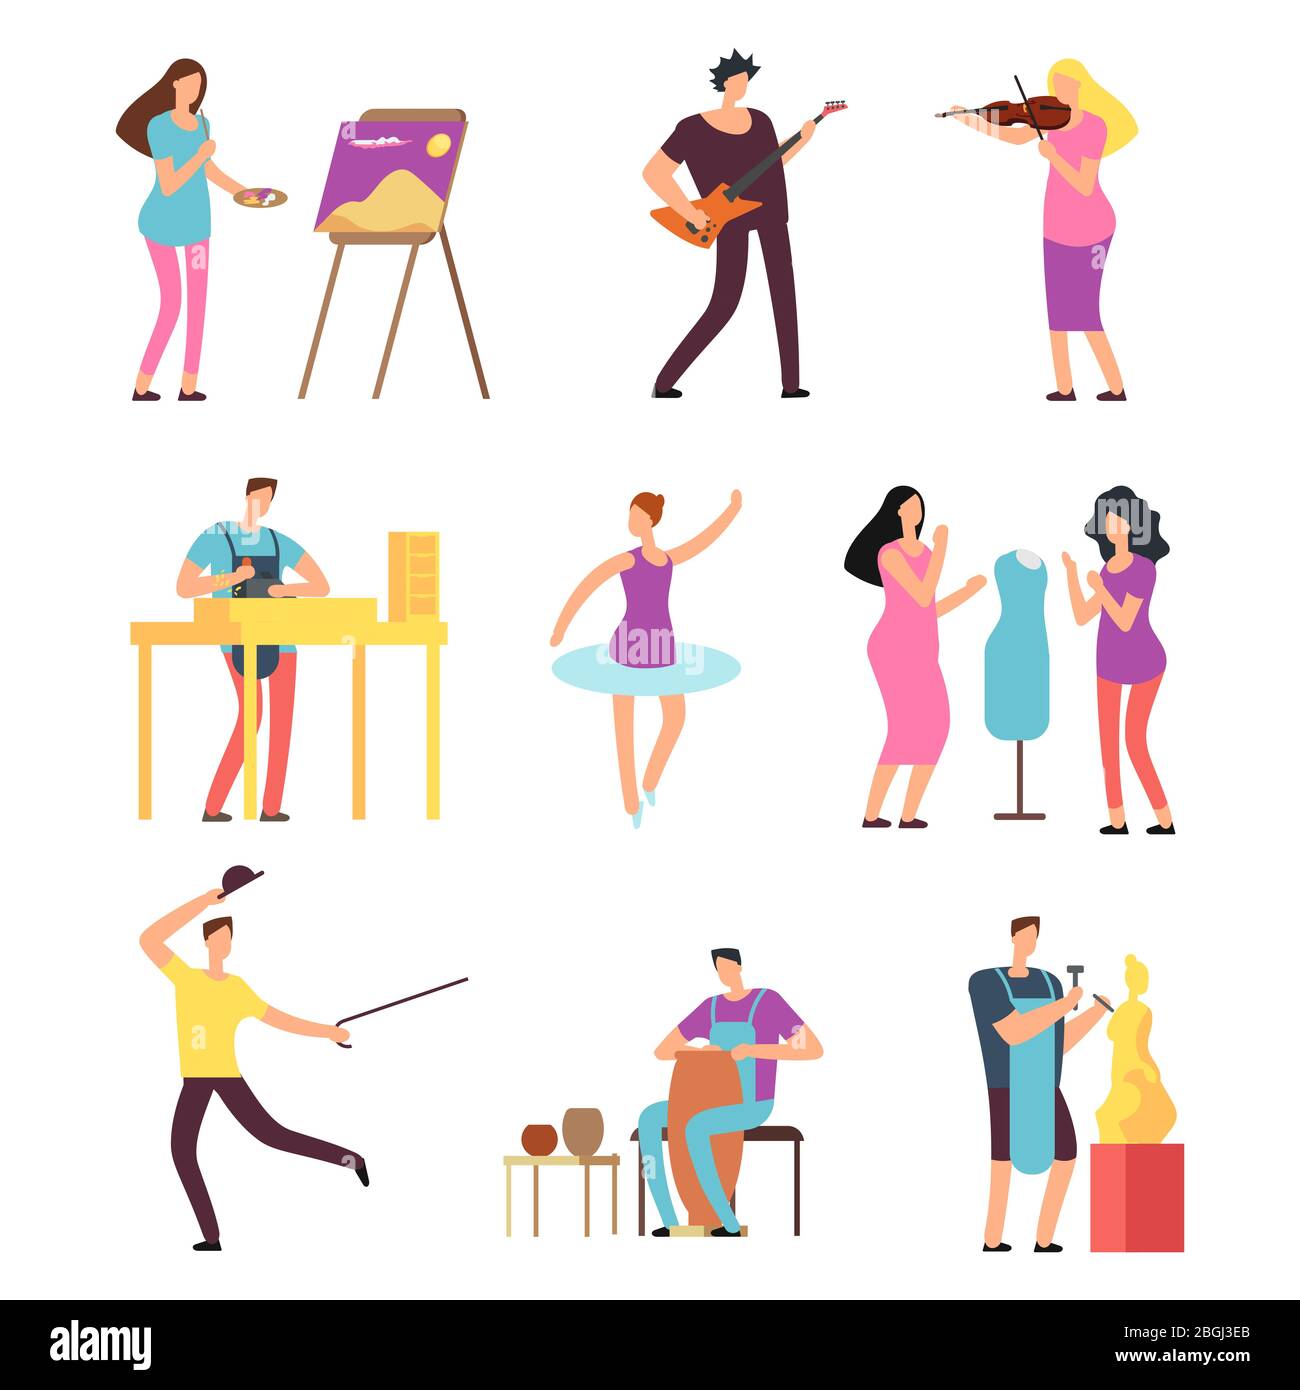 Cartoon artists and musicians vector isolated characters in creative artistic hobbies. People hobby, artistic drawing and playing, amateur painter and sculpture illustration Stock Vector